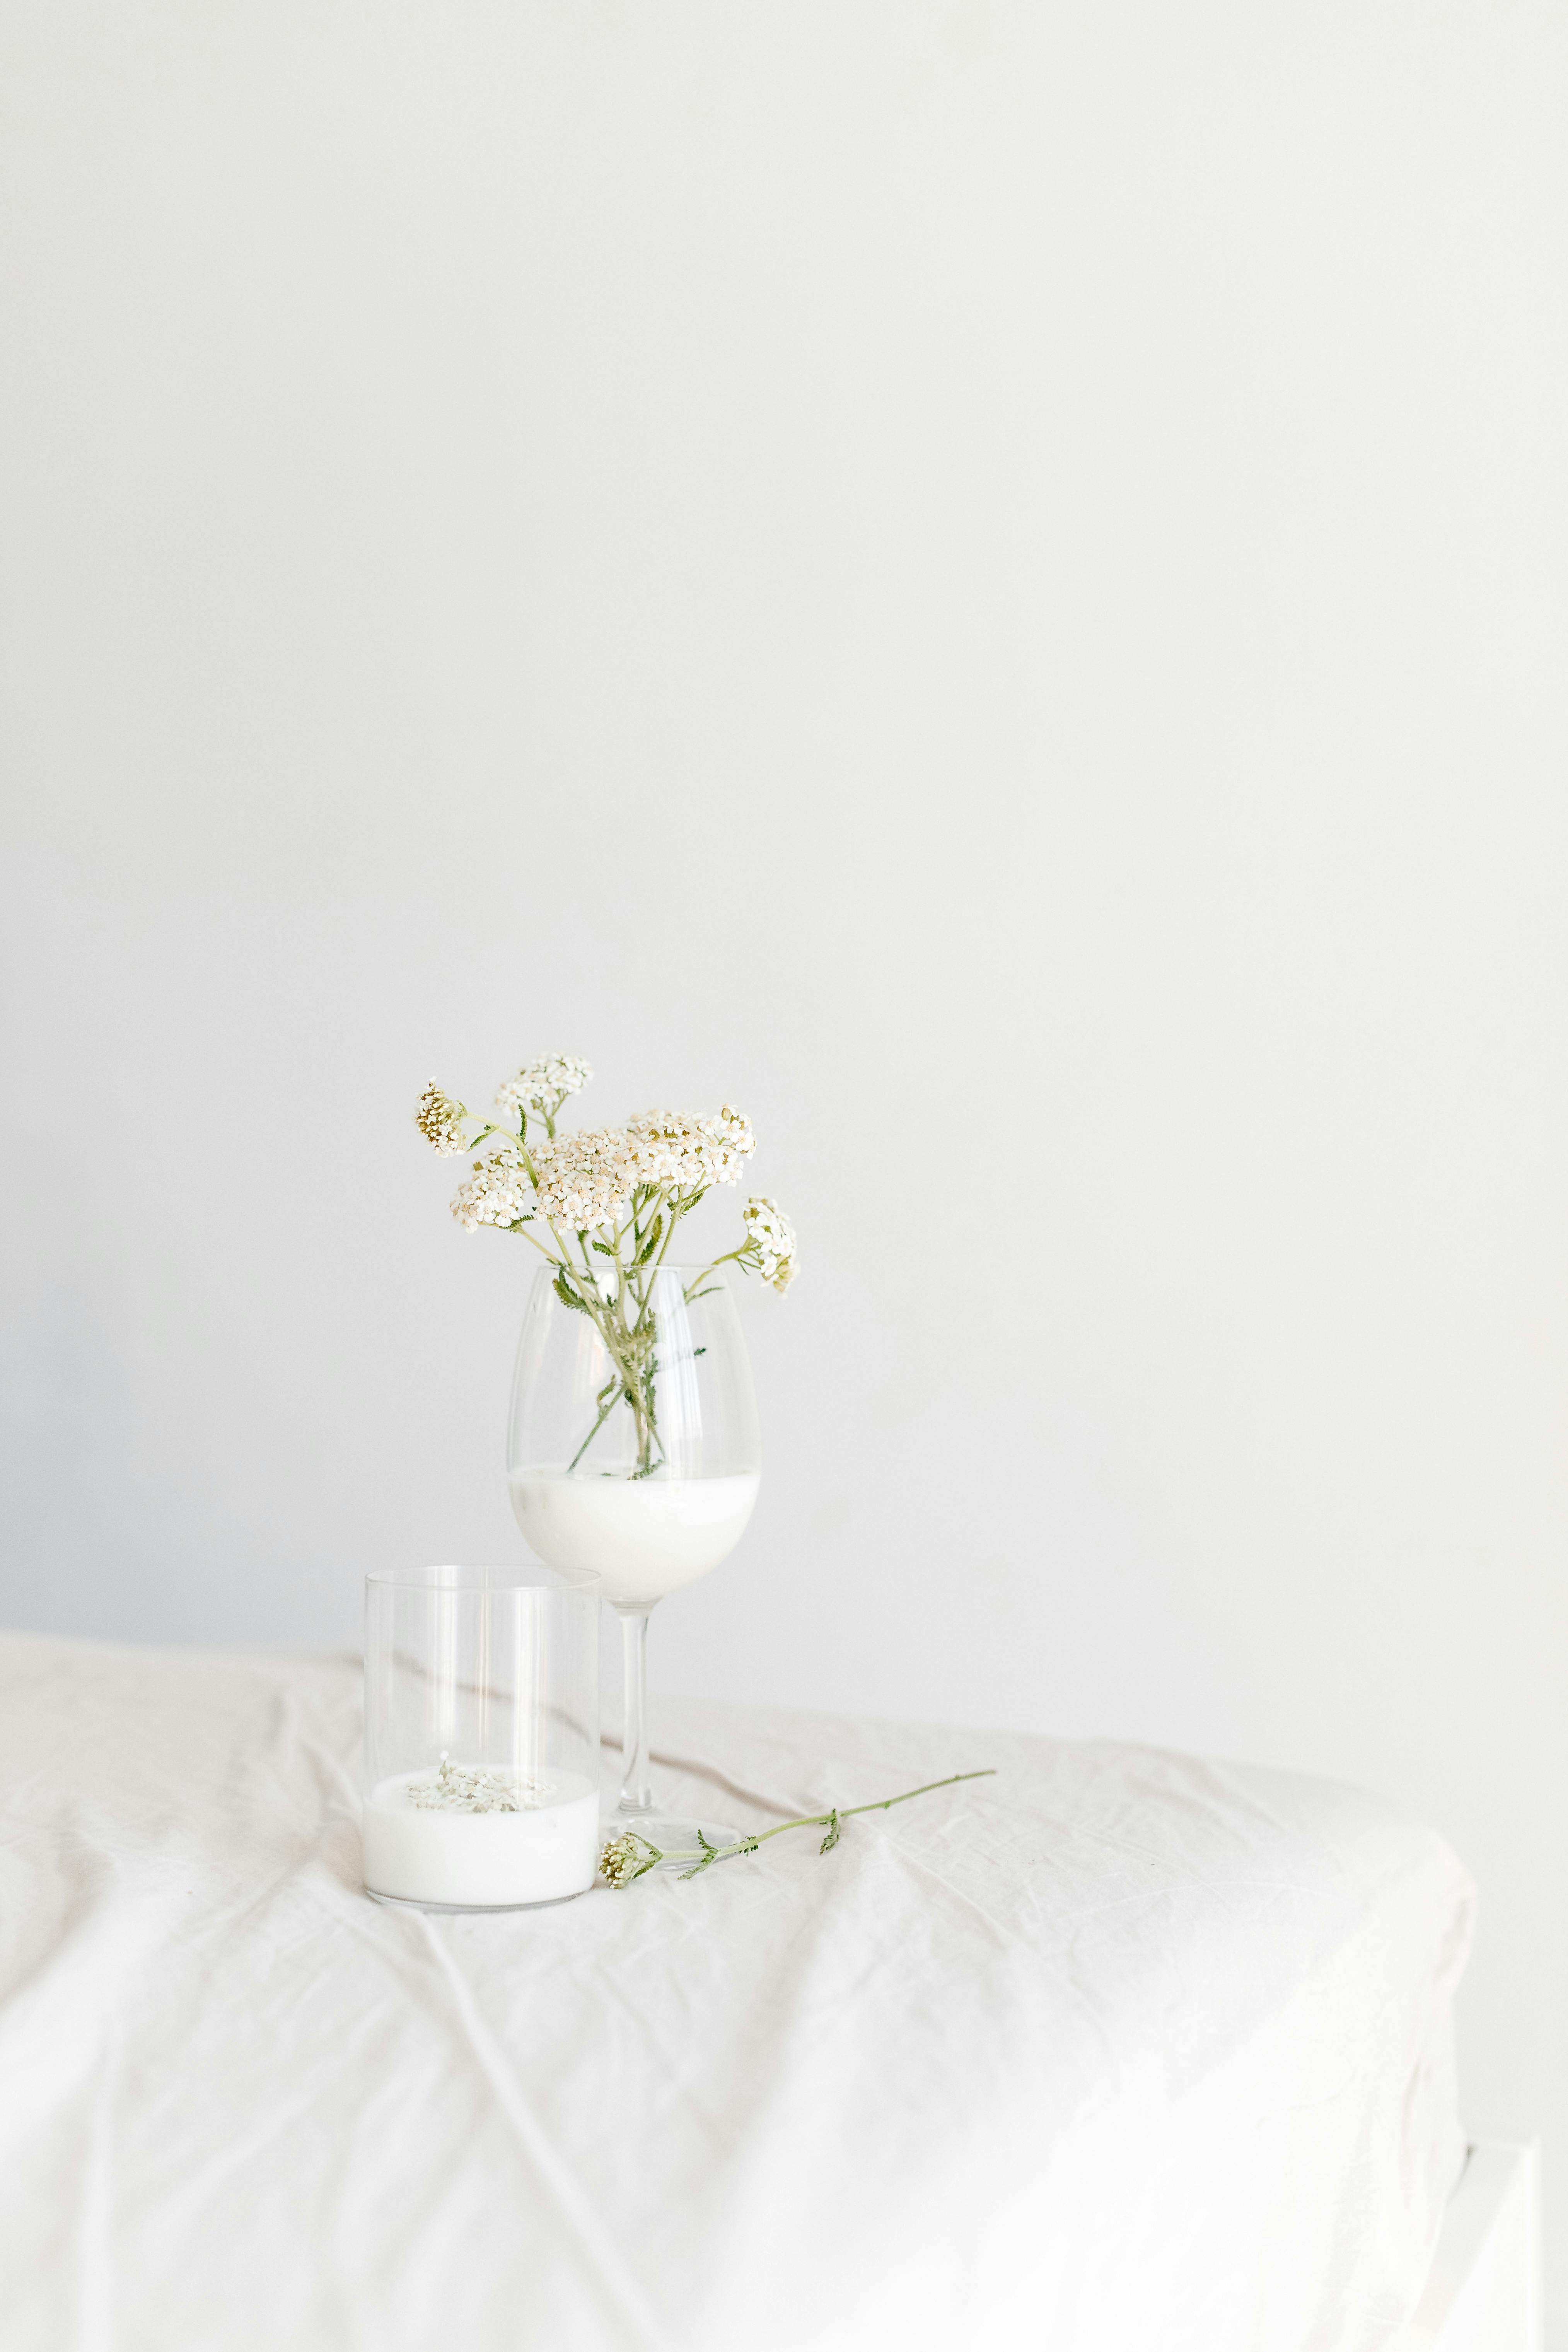 white flowers in clear glass vase on white table cloth